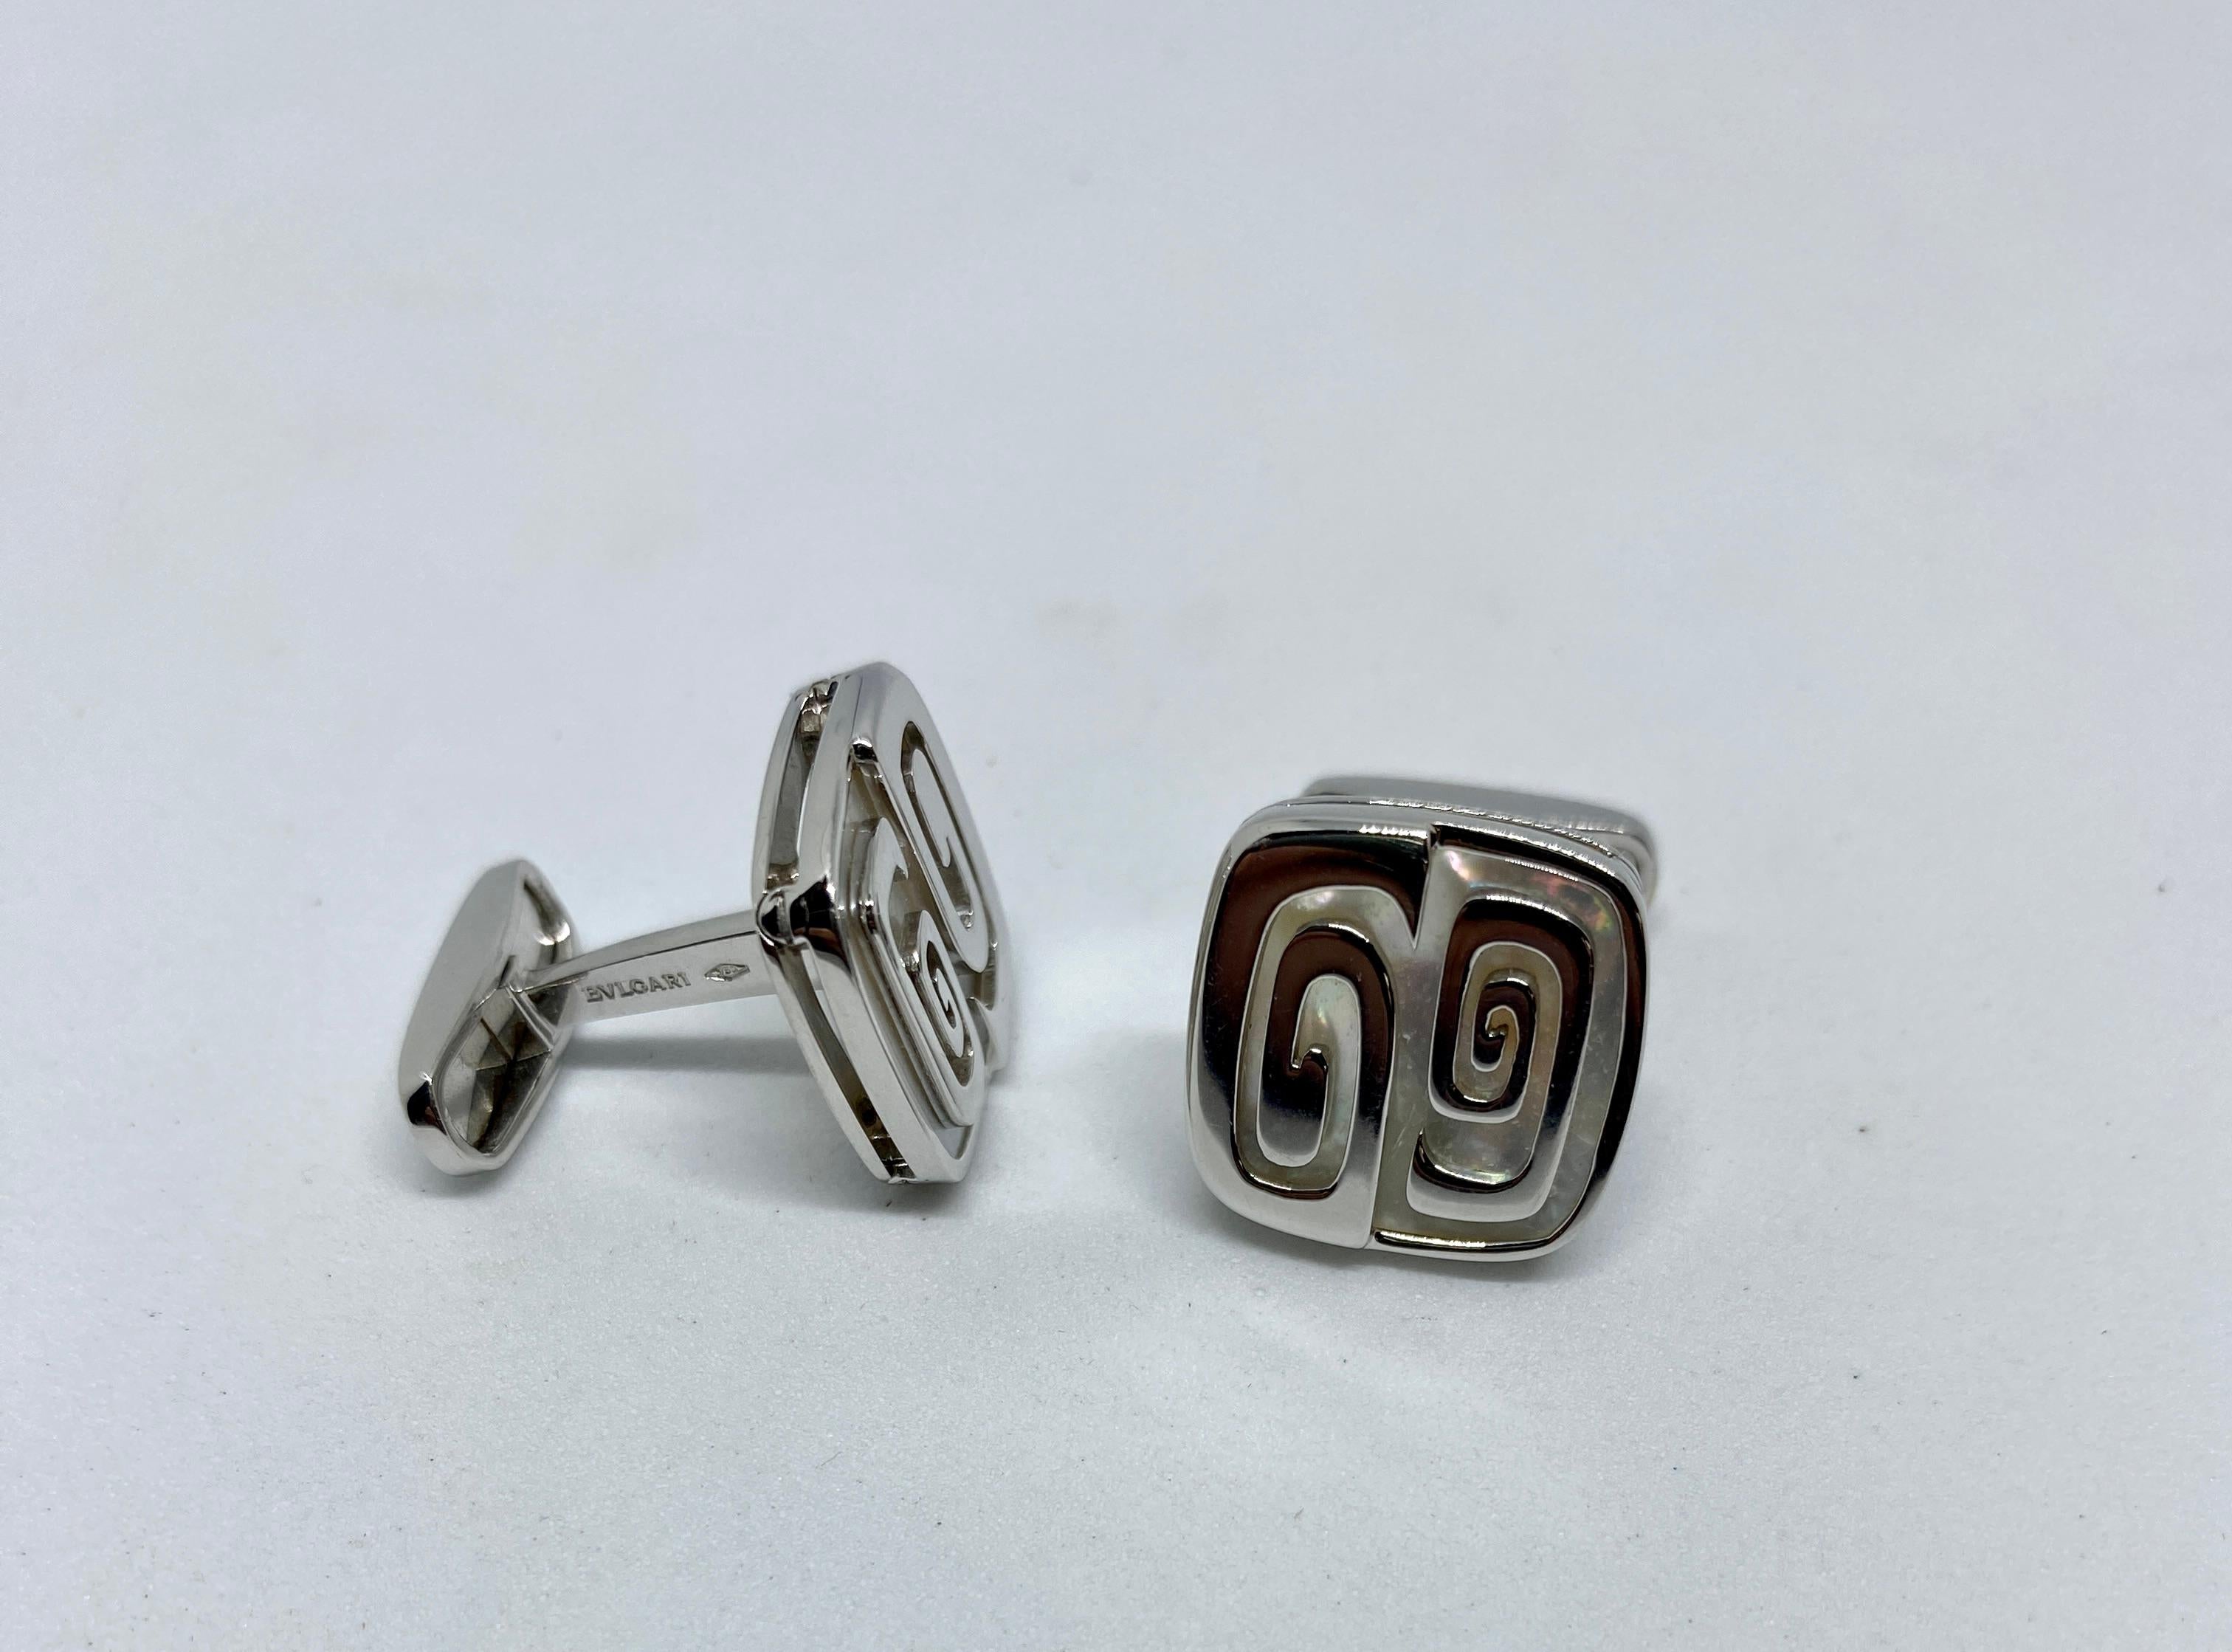 These extremely rare, modern cufflinks feature abstract forms meant to evoke the spirit of Bulgari in the early 20th Century, before the rise of fascism in Italy. In contrast to more recent BVLGARI designs, jewelry at that time typically exhibited